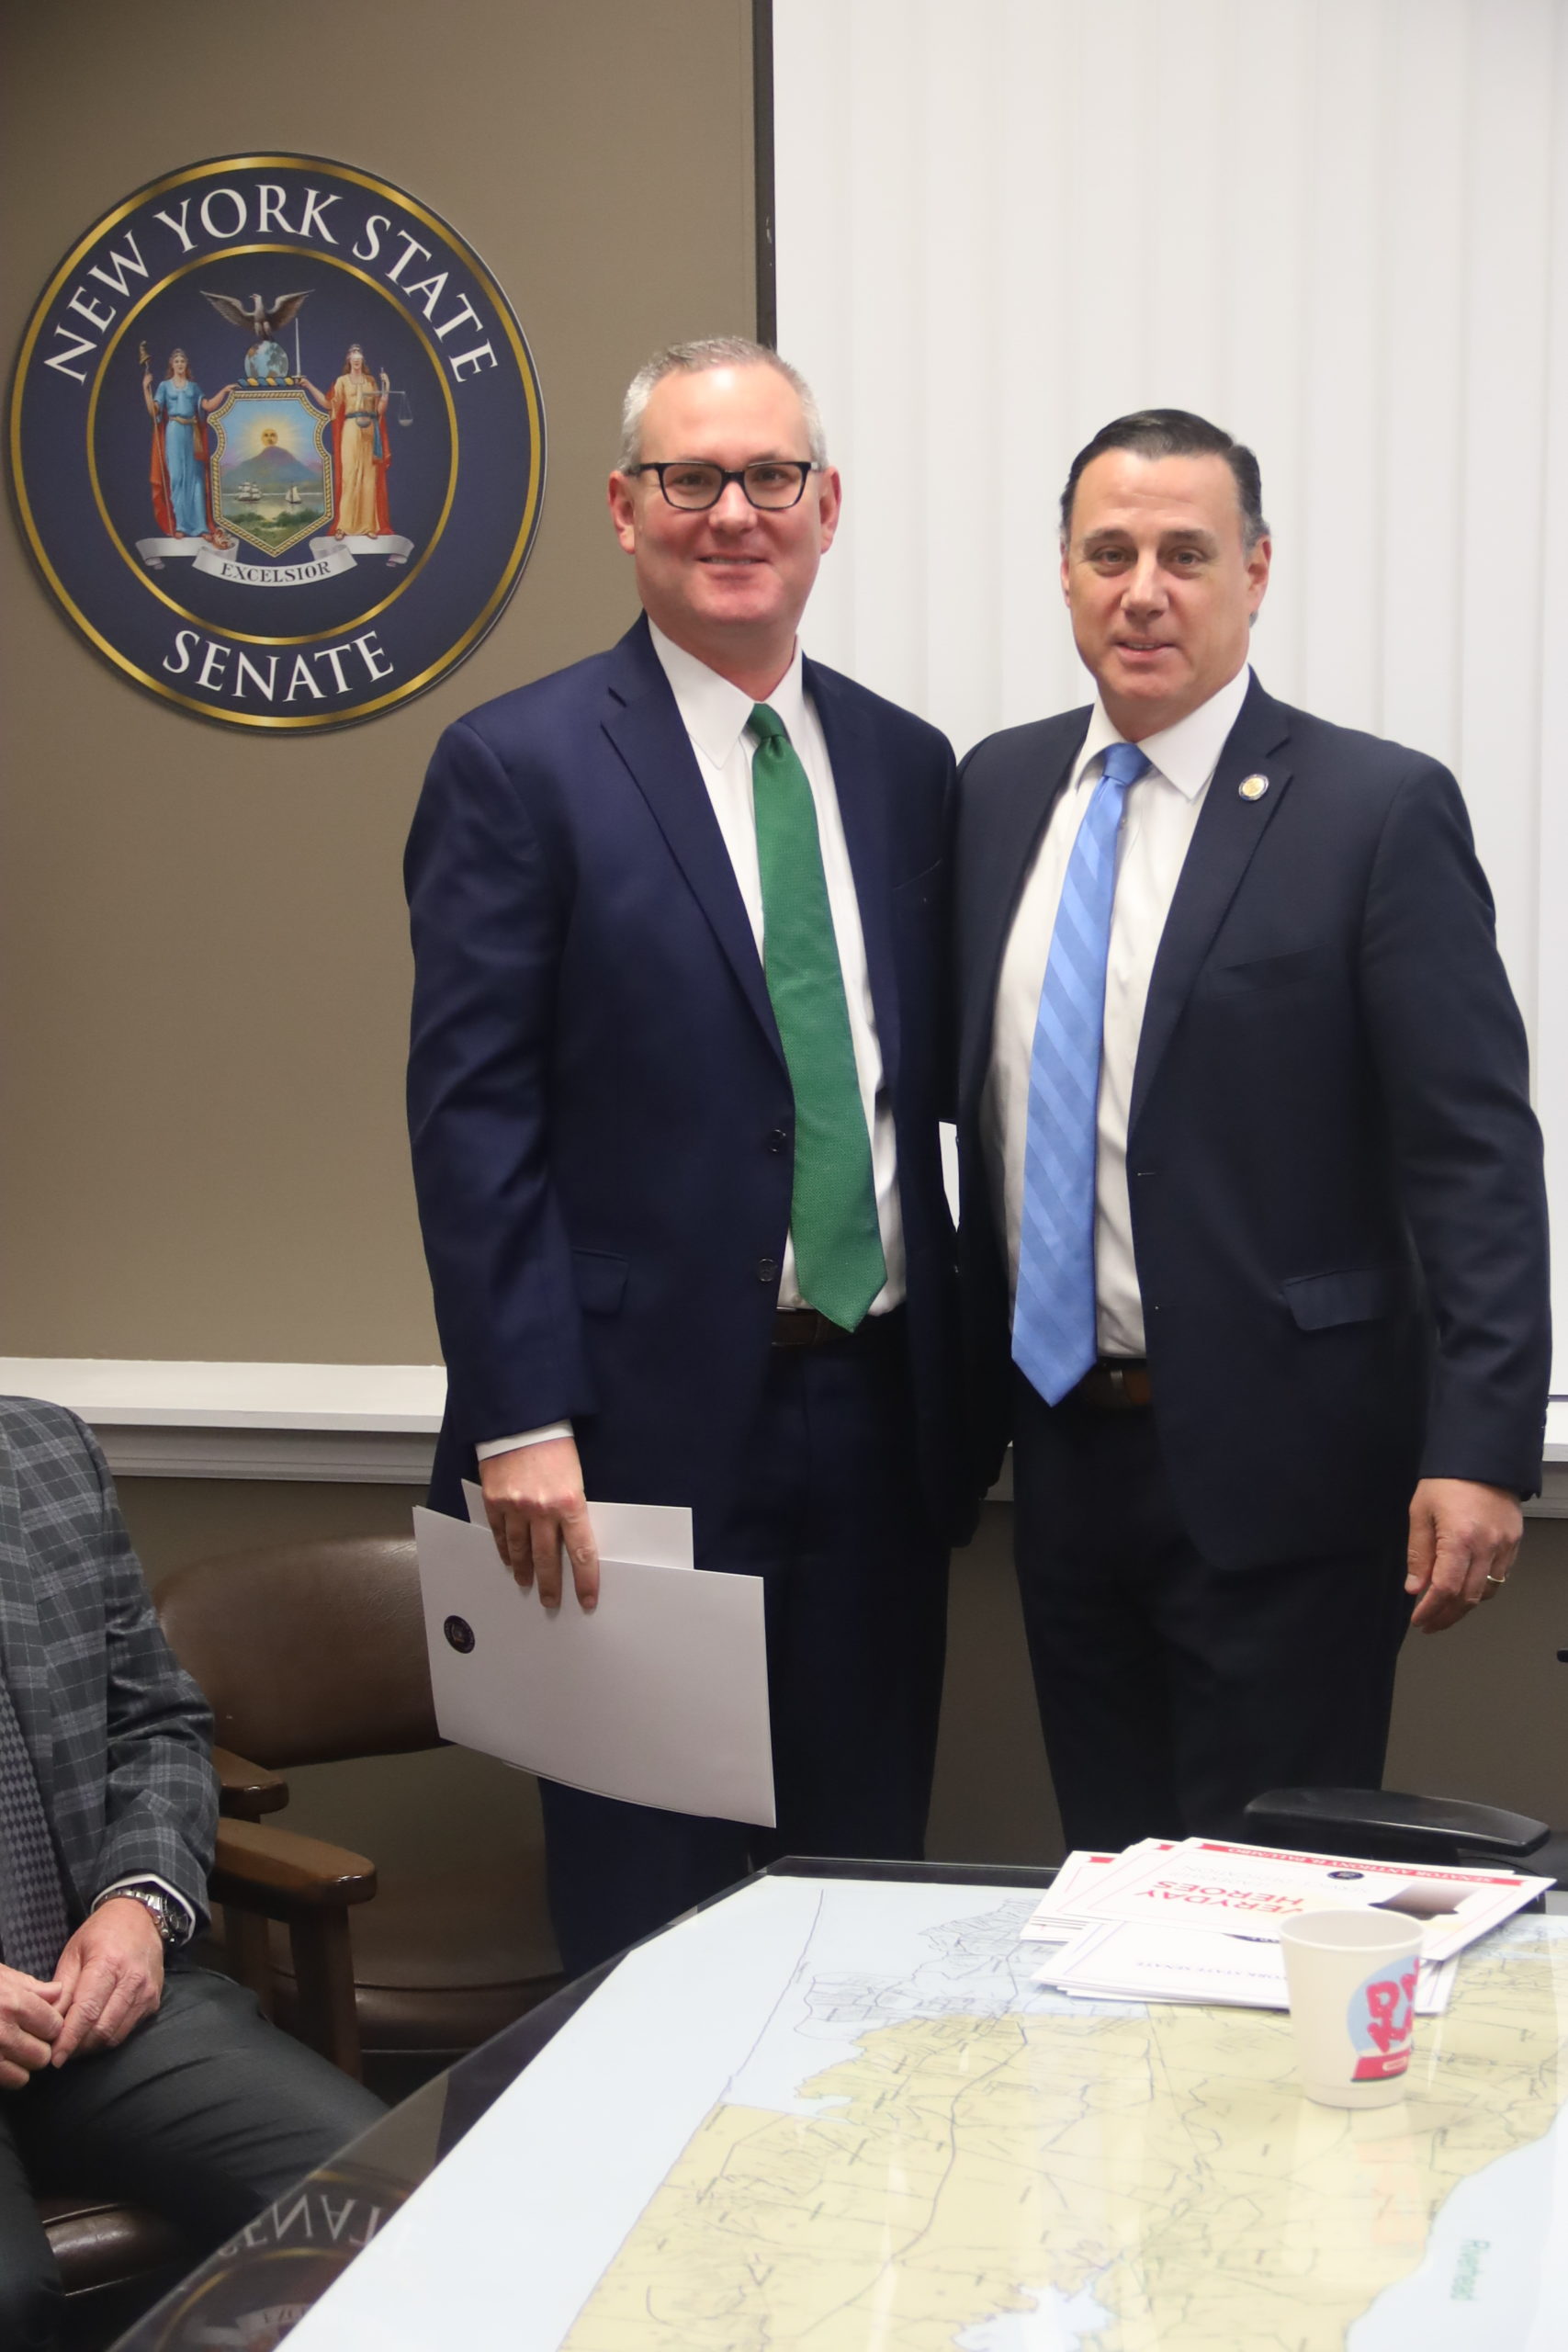 Hampton Bays Superintendent of Schools Lars Clemensen was honored by New York State Senator Anthony Palumbo for his efforts through the COVID pandemic.